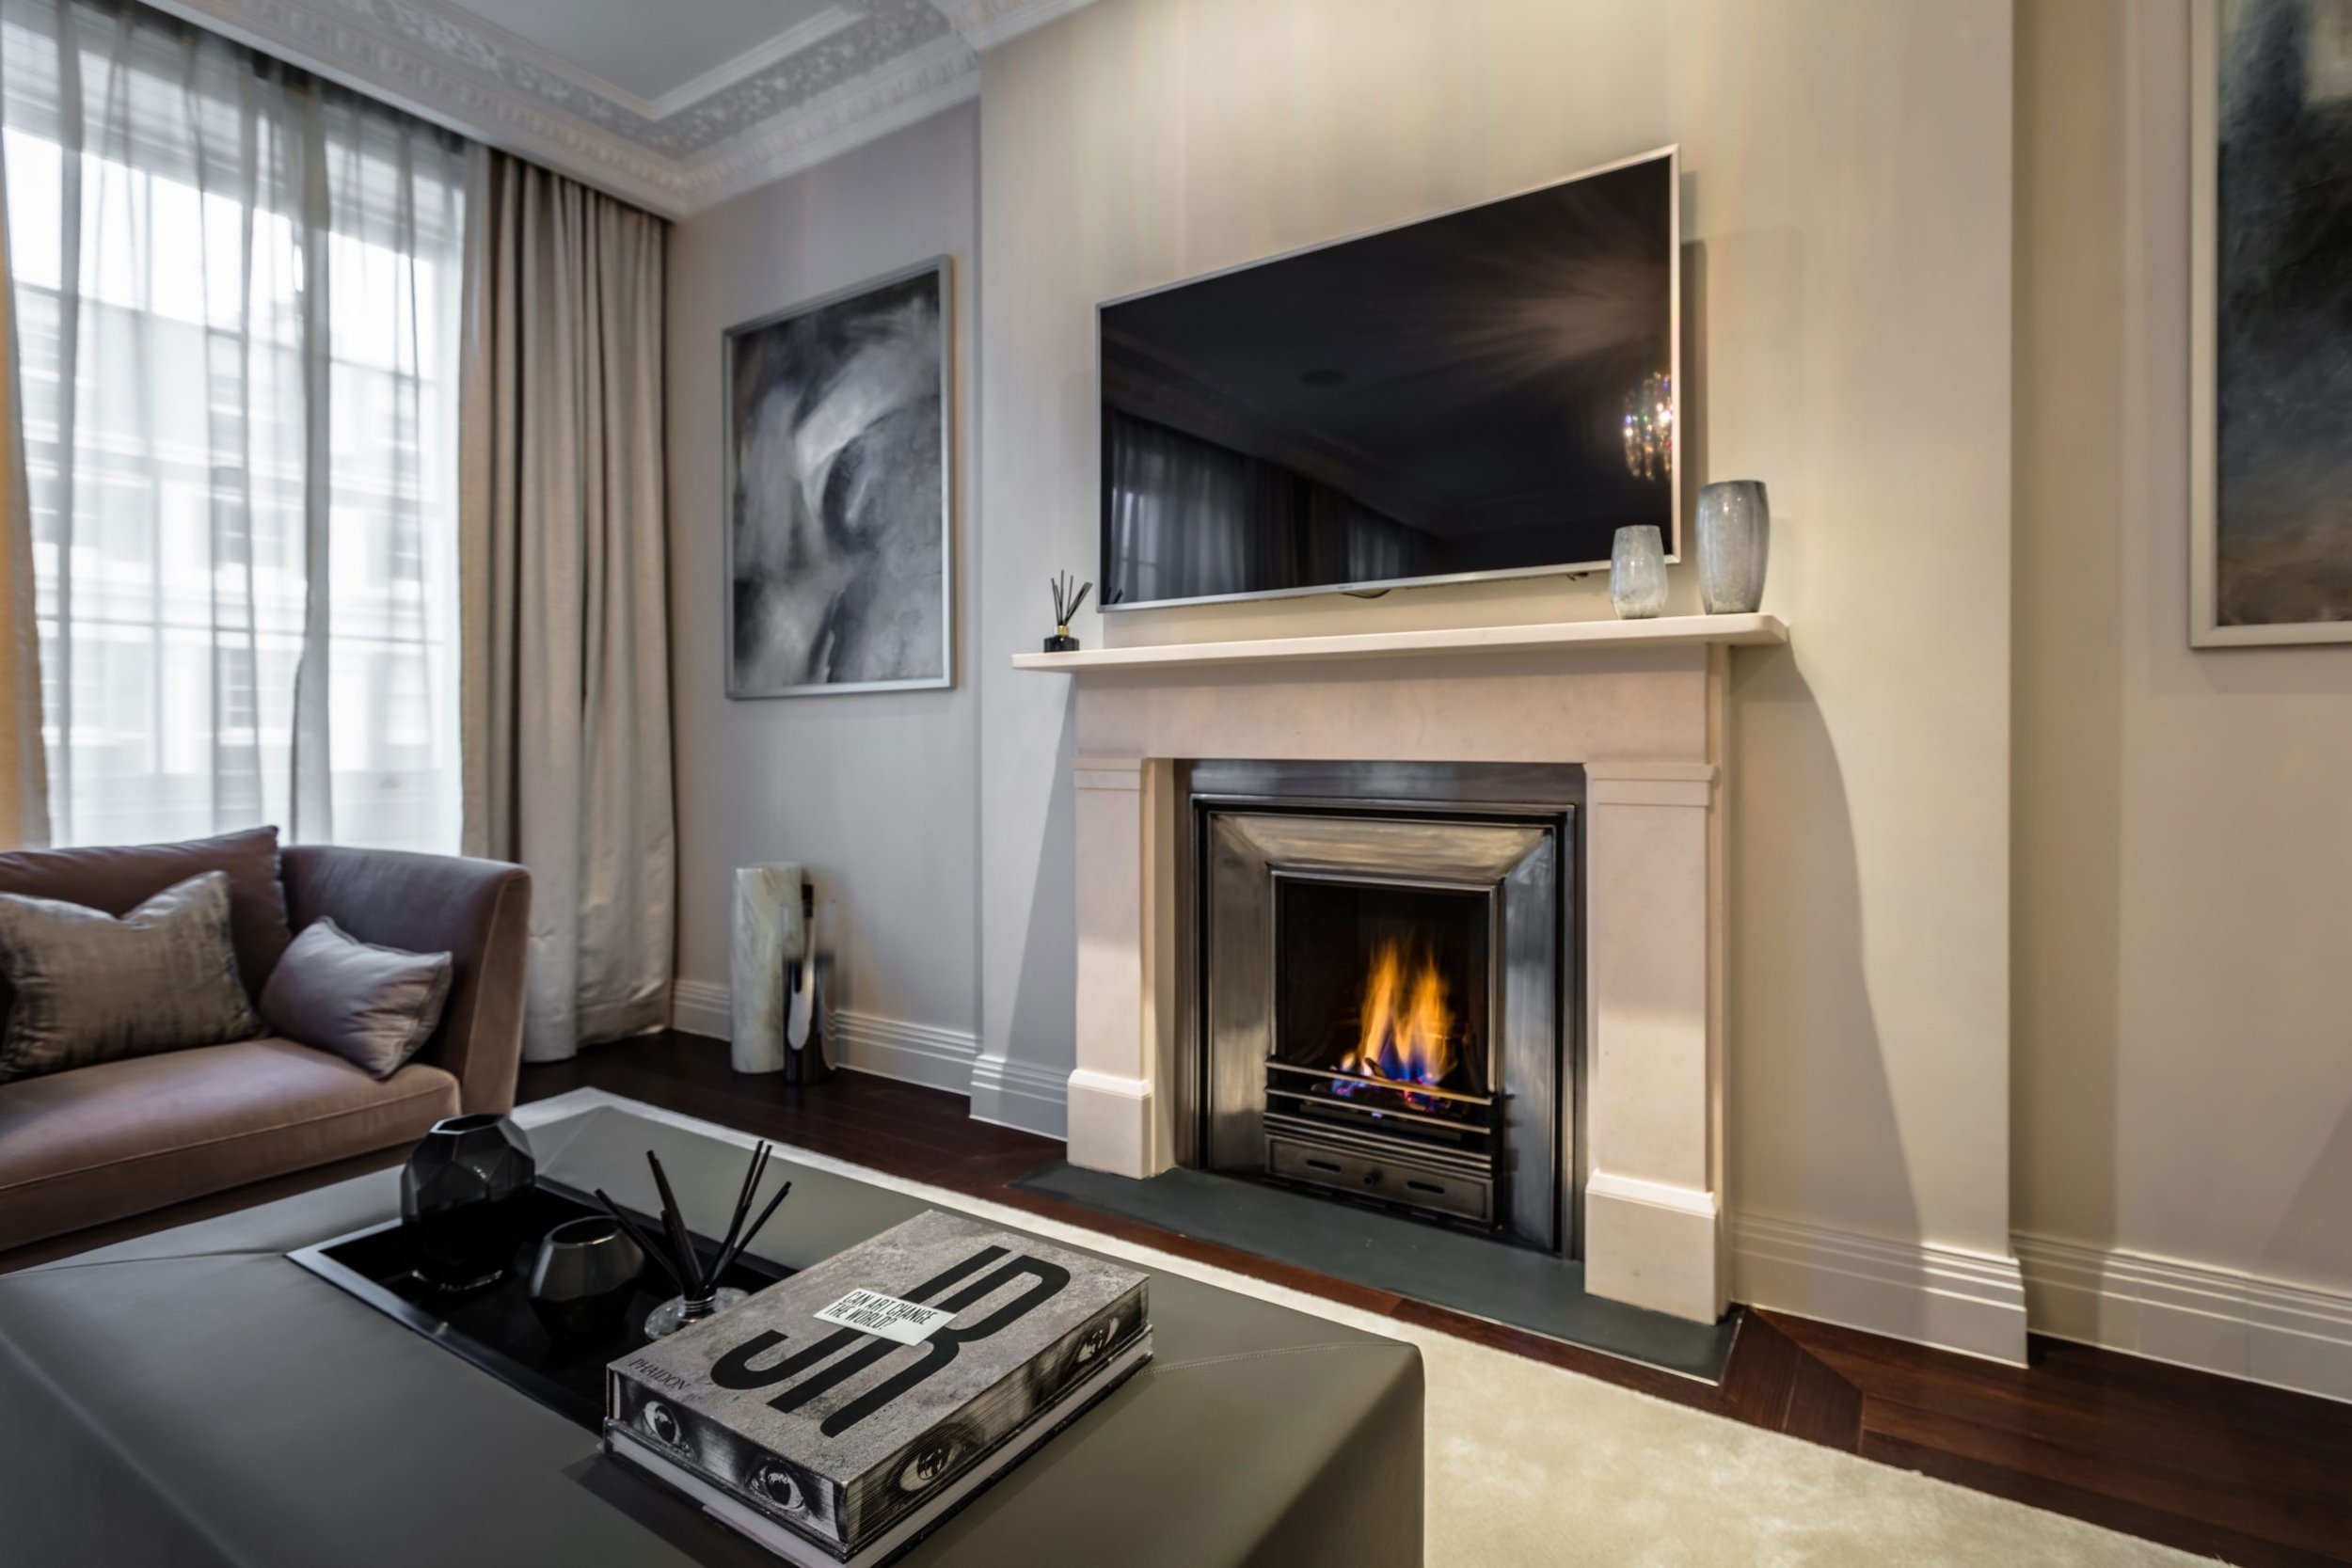 London Construction Company Ant Yapi delivering high end residential finishes for 13 Eaton Place